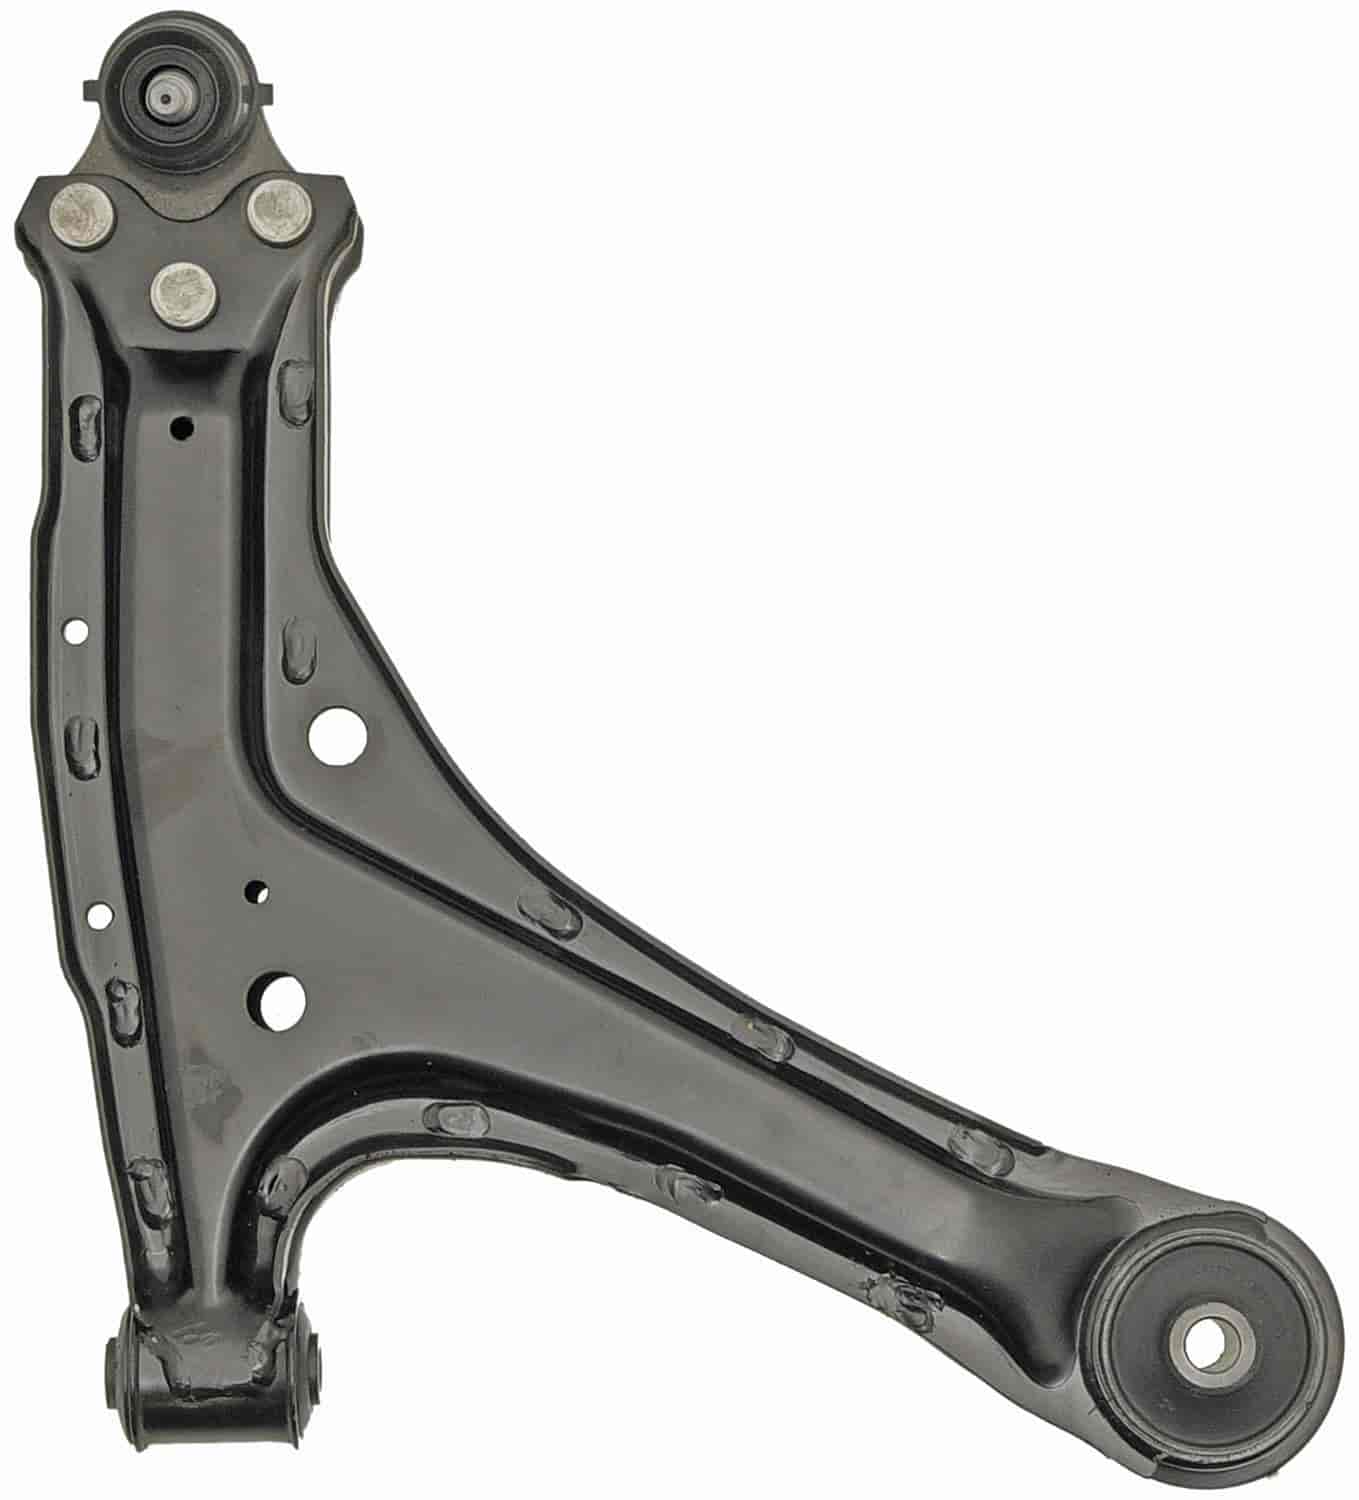 Lower Control Arm 1997-2004 Oldsmobile, 1997-2005 Chevy, 1999-2005 Pontiac - Front Right